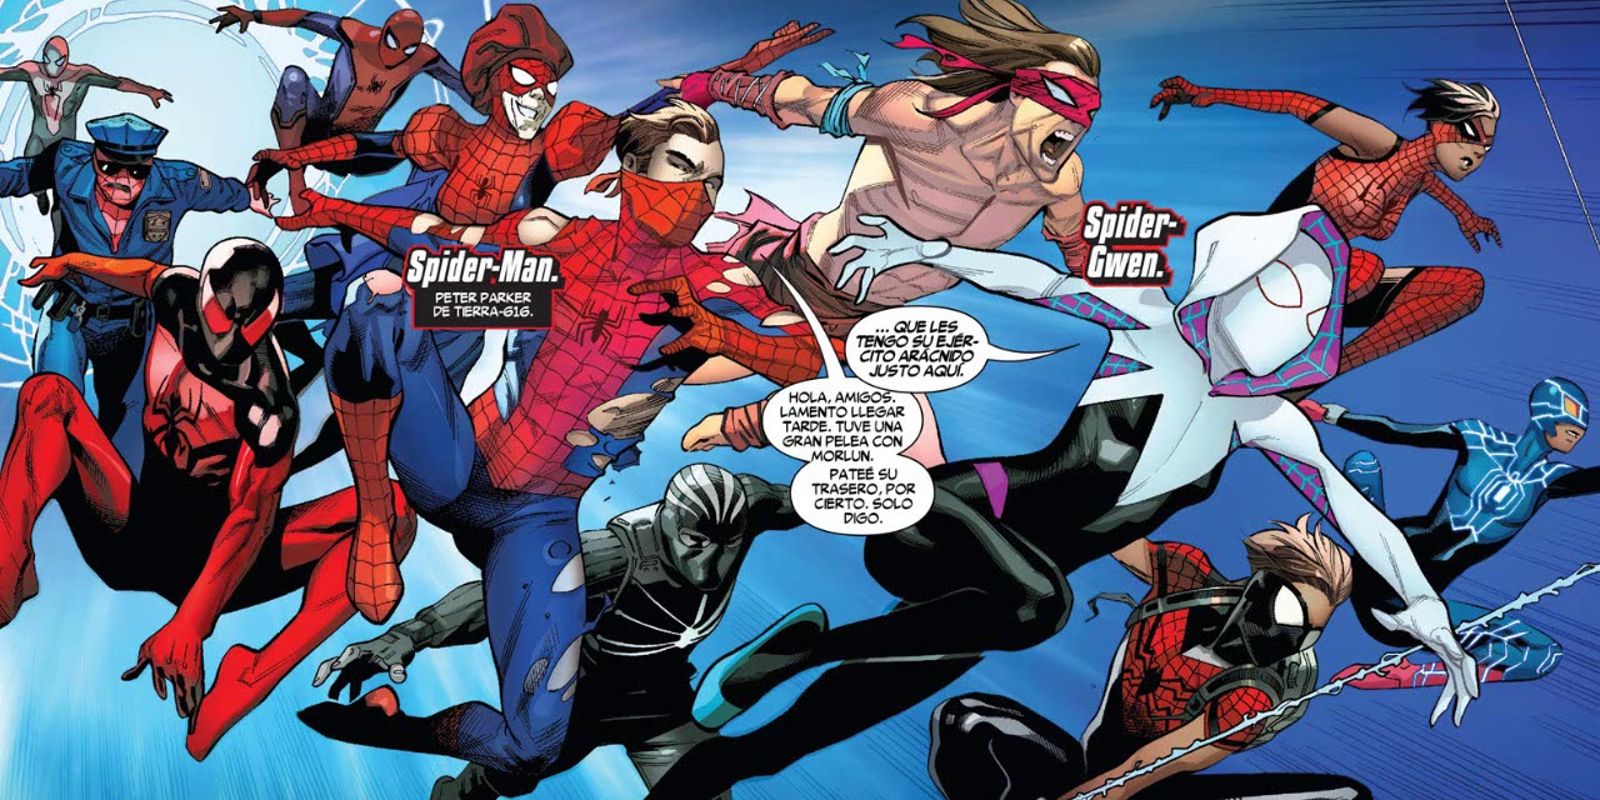 Spider-Gwen leading an army of Spider-People into battle in Spider-Geddon